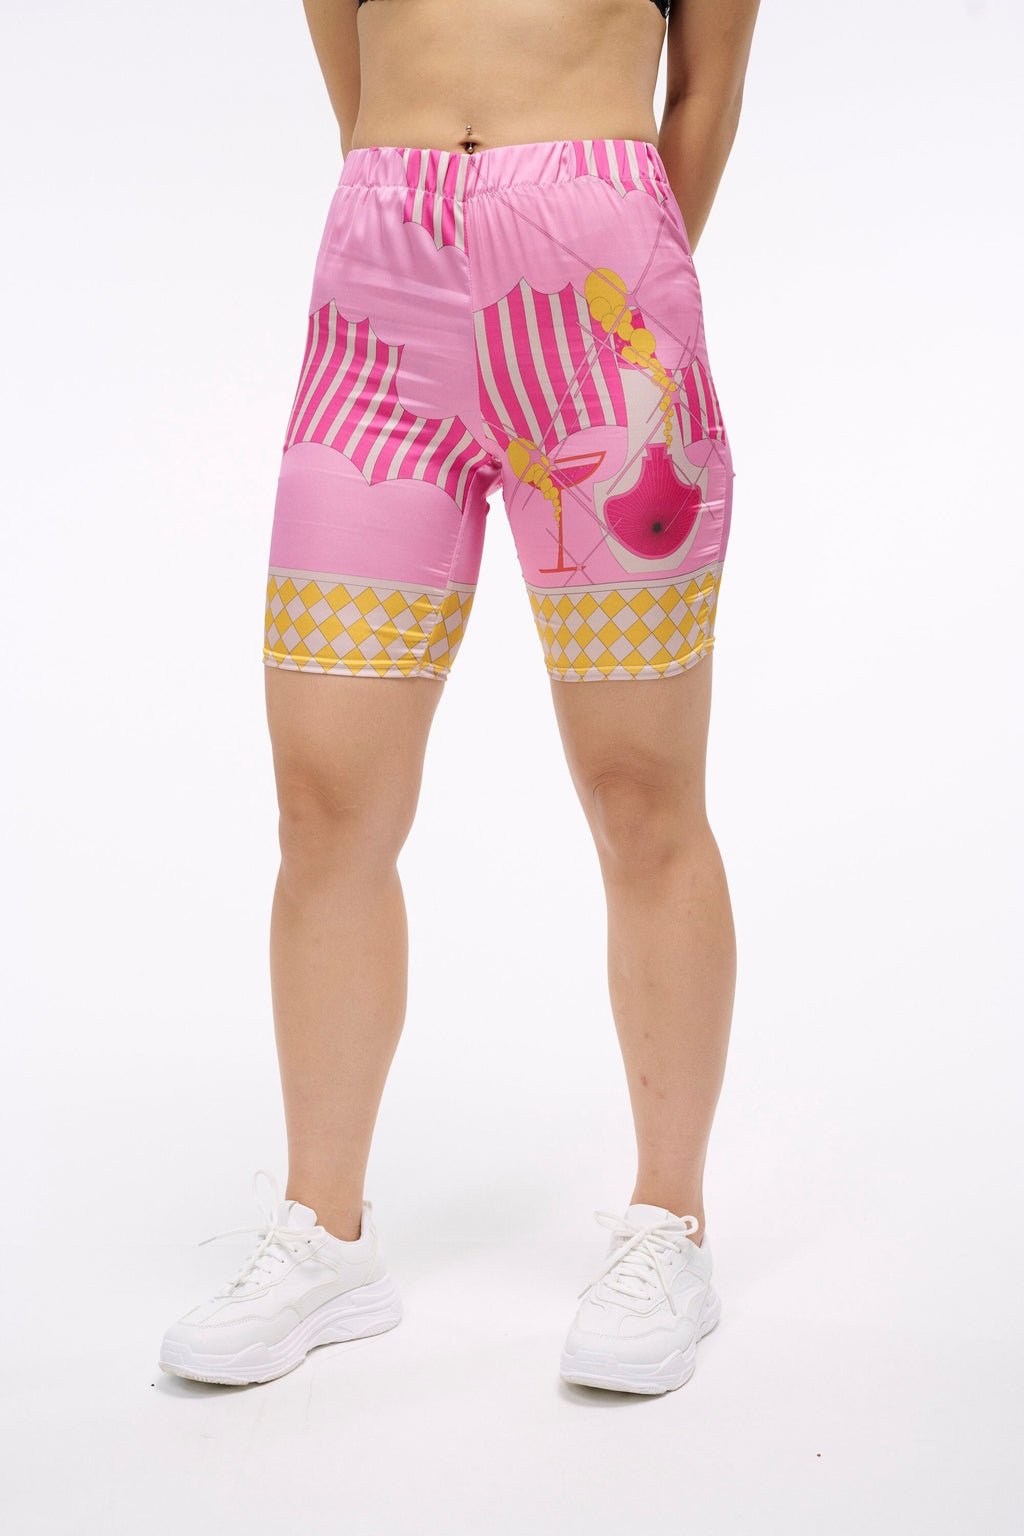 The Pink Bubbly Pajama Shorts | A Chic Pyjama Short for the Sophisticated Lady | Satin Elastic Short in Pink and Yellow | Goose Taffy